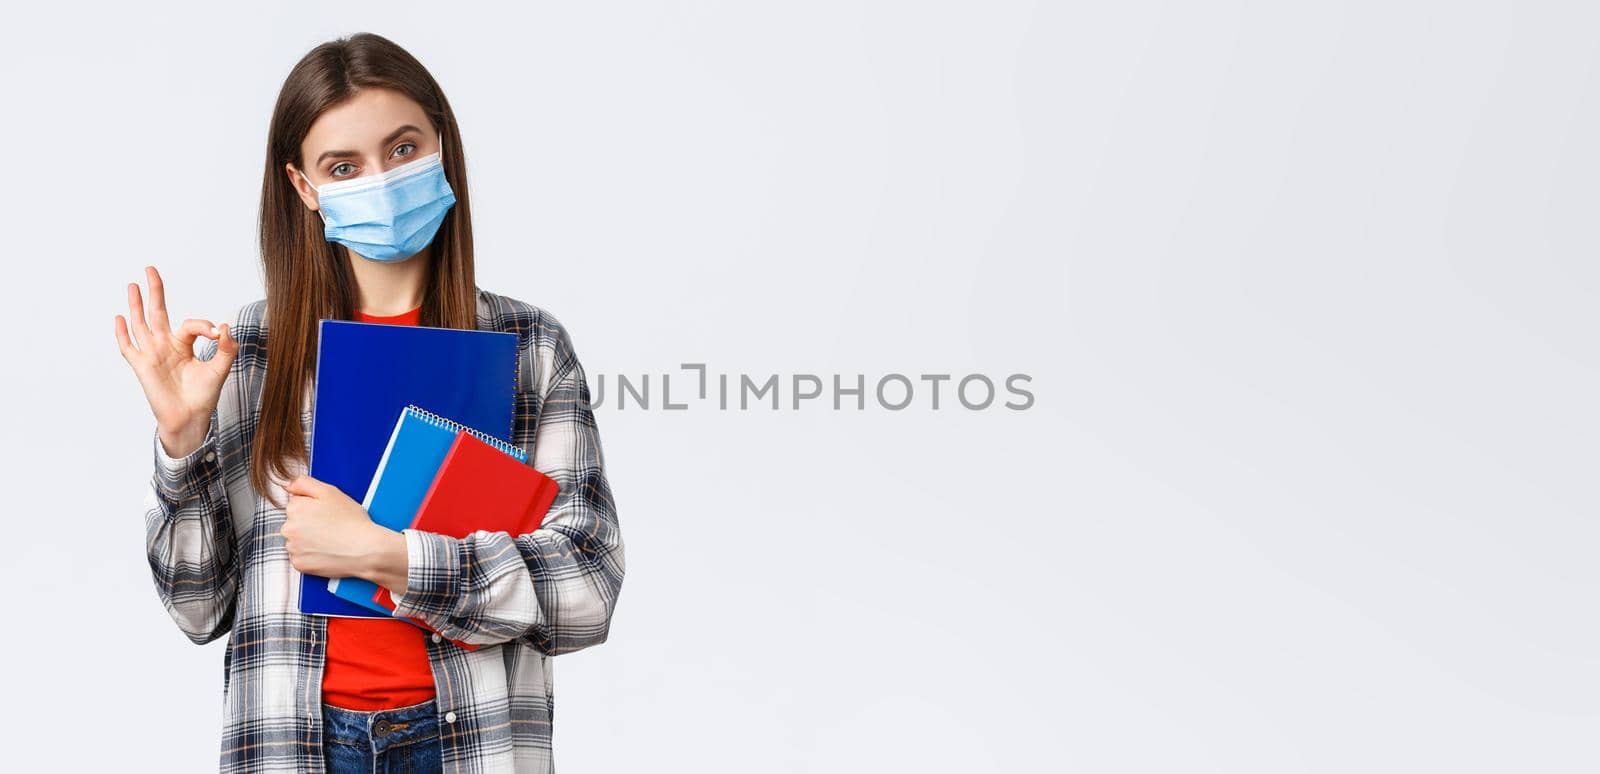 Coronavirus pandemic, covid-19 education, and back to school concept. Determined young woman, student in medical mask with notebooks and study material, show okay, no problem sign.